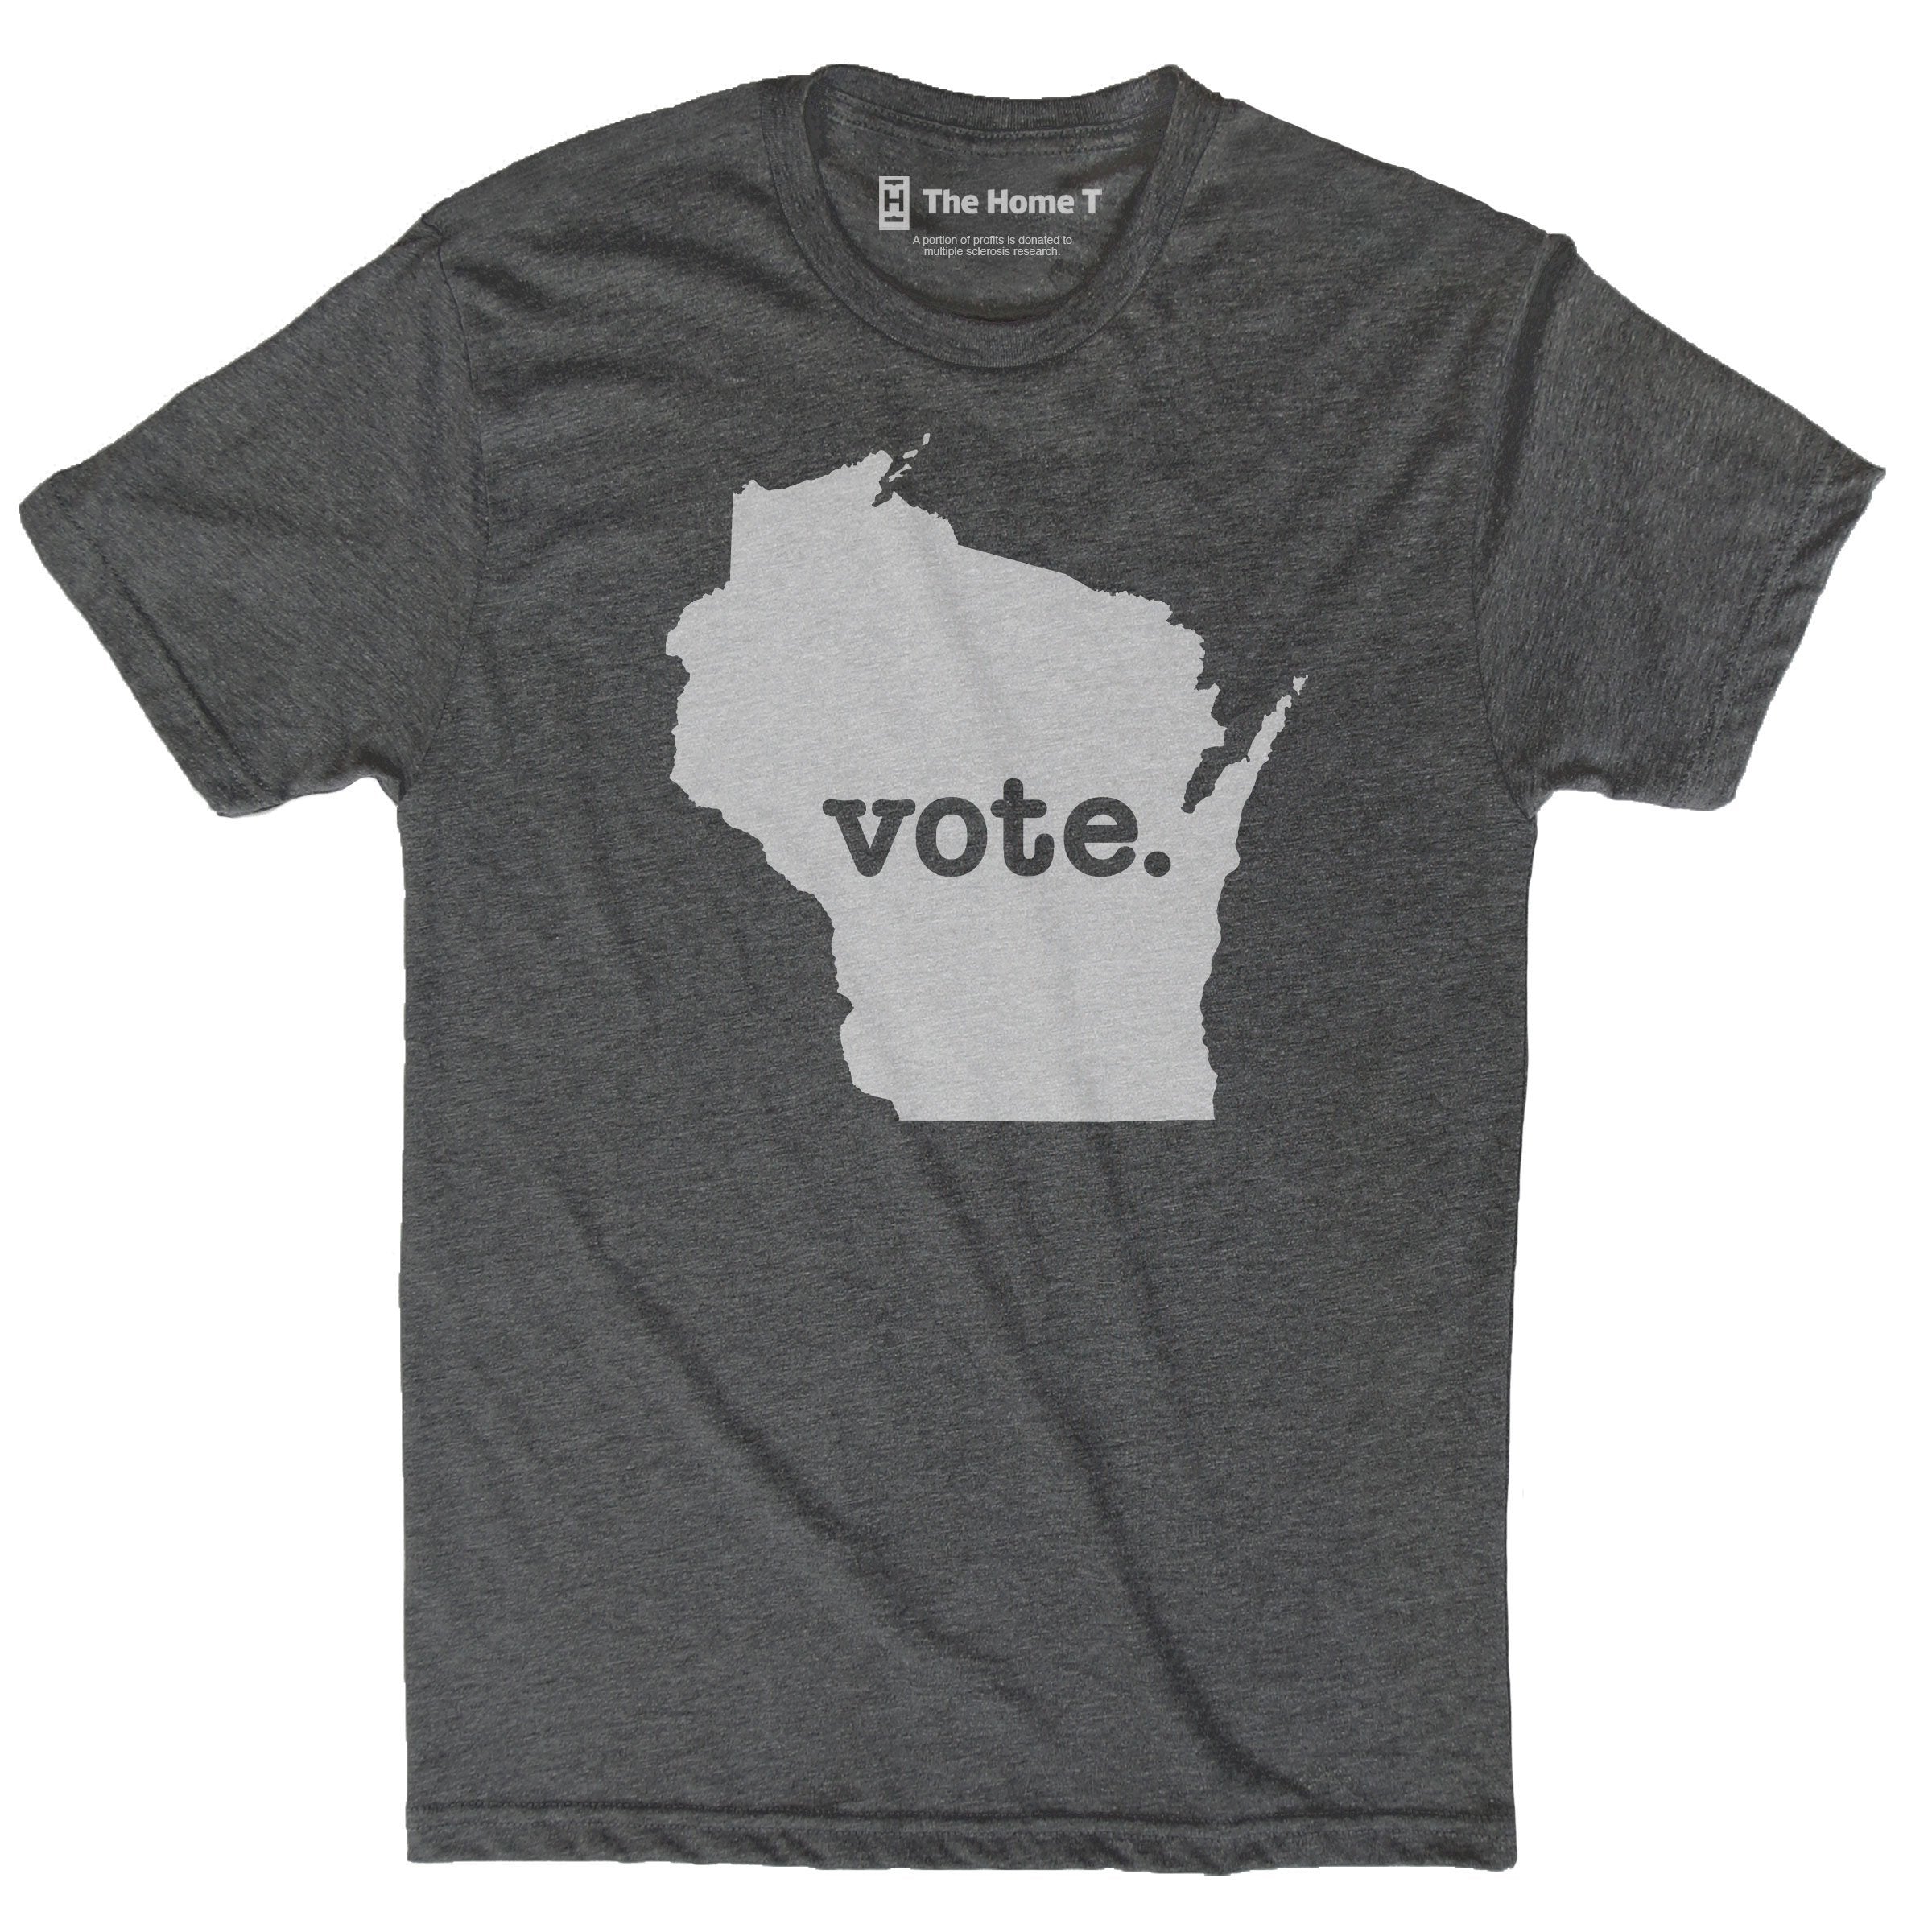 Wisconsin Vote Home T Vote The Home T XS Grey